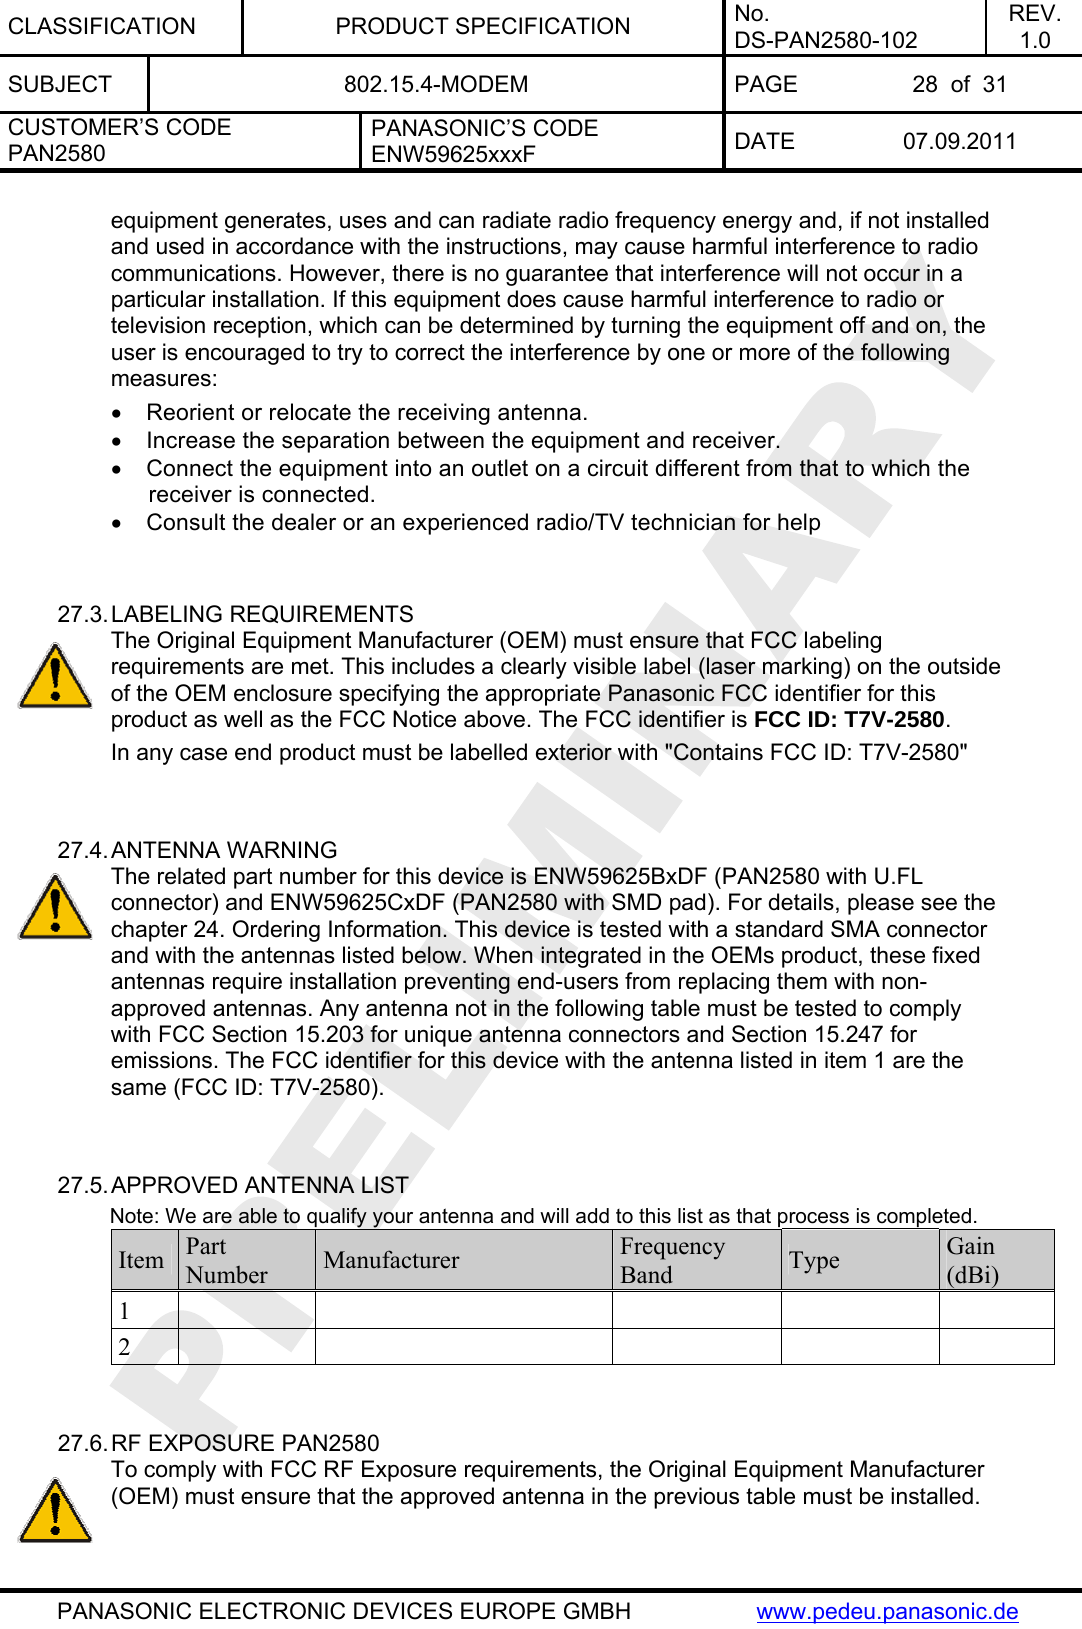 CLASSIFICATION PRODUCT SPECIFICATION No. DS-PAN2580-102 REV. 1.0 SUBJECT  802.15.4-MODEM  PAGE  28  of  31 CUSTOMER’S CODE PAN2580 PANASONIC’S CODE ENW59625xxxF  DATE 07.09.2011   PANASONIC ELECTRONIC DEVICES EUROPE GMBH  www.pedeu.panasonic.de equipment generates, uses and can radiate radio frequency energy and, if not installed and used in accordance with the instructions, may cause harmful interference to radio communications. However, there is no guarantee that interference will not occur in a particular installation. If this equipment does cause harmful interference to radio or television reception, which can be determined by turning the equipment off and on, the user is encouraged to try to correct the interference by one or more of the following measures: •  Reorient or relocate the receiving antenna. •  Increase the separation between the equipment and receiver. •  Connect the equipment into an outlet on a circuit different from that to which the receiver is connected. •  Consult the dealer or an experienced radio/TV technician for help   27.3. LABELING REQUIREMENTS The Original Equipment Manufacturer (OEM) must ensure that FCC labeling requirements are met. This includes a clearly visible label (laser marking) on the outside of the OEM enclosure specifying the appropriate Panasonic FCC identifier for this product as well as the FCC Notice above. The FCC identifier is FCC ID: T7V-2580. In any case end product must be labelled exterior with &quot;Contains FCC ID: T7V-2580&quot;   27.4. ANTENNA WARNING The related part number for this device is ENW59625BxDF (PAN2580 with U.FL connector) and ENW59625CxDF (PAN2580 with SMD pad). For details, please see the chapter 24. Ordering Information. This device is tested with a standard SMA connector and with the antennas listed below. When integrated in the OEMs product, these fixed antennas require installation preventing end-users from replacing them with non-approved antennas. Any antenna not in the following table must be tested to comply with FCC Section 15.203 for unique antenna connectors and Section 15.247 for emissions. The FCC identifier for this device with the antenna listed in item 1 are the same (FCC ID: T7V-2580).   27.5. APPROVED ANTENNA LIST          Note: We are able to qualify your antenna and will add to this list as that process is completed. Item  Part Number  Manufacturer  Frequency Band  Type  Gain (dBi) 1          2            27.6. RF EXPOSURE PAN2580 To comply with FCC RF Exposure requirements, the Original Equipment Manufacturer (OEM) must ensure that the approved antenna in the previous table must be installed.  